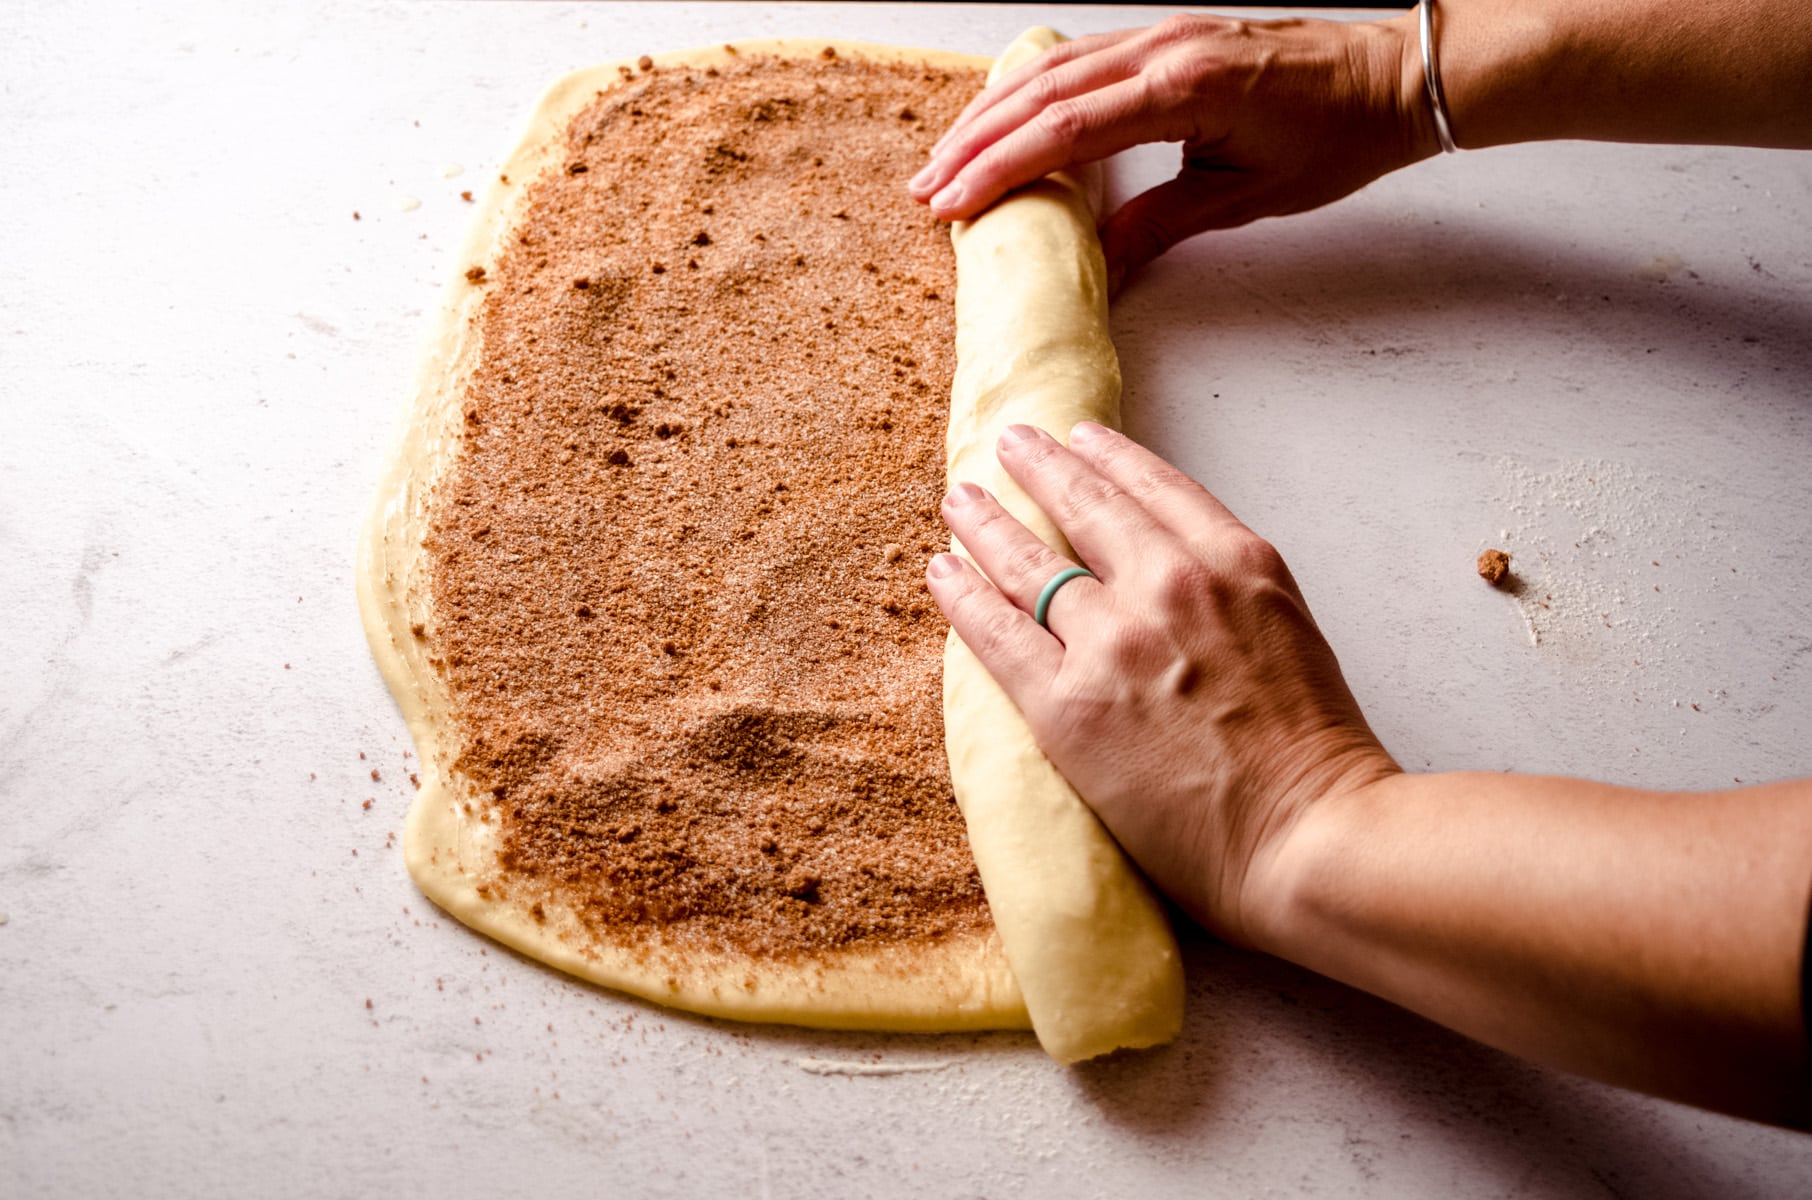 Hands rolling up a log of cinnamon roll dough.